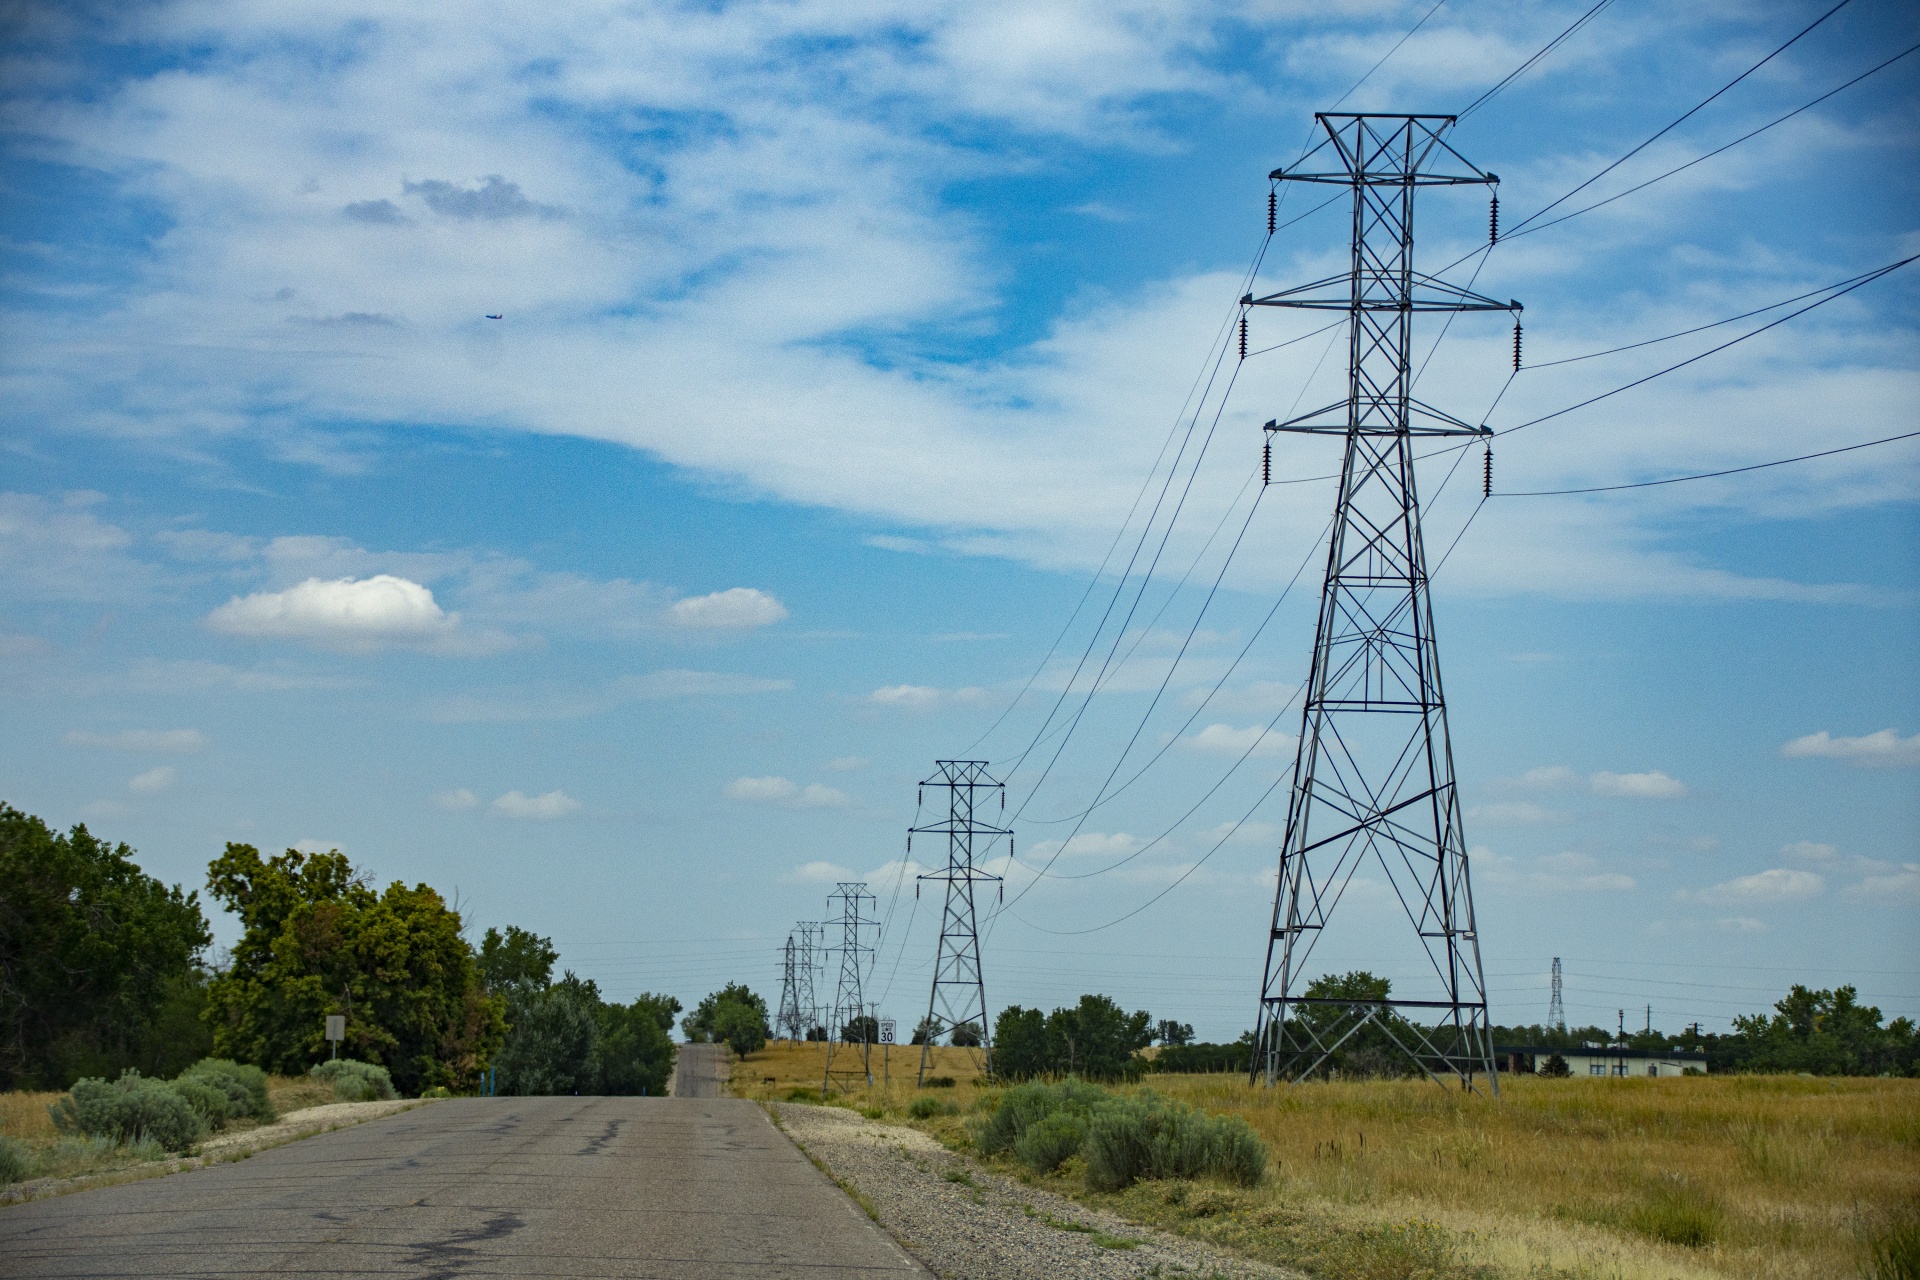 flat highway through the Colorado with high power utility lines along the road